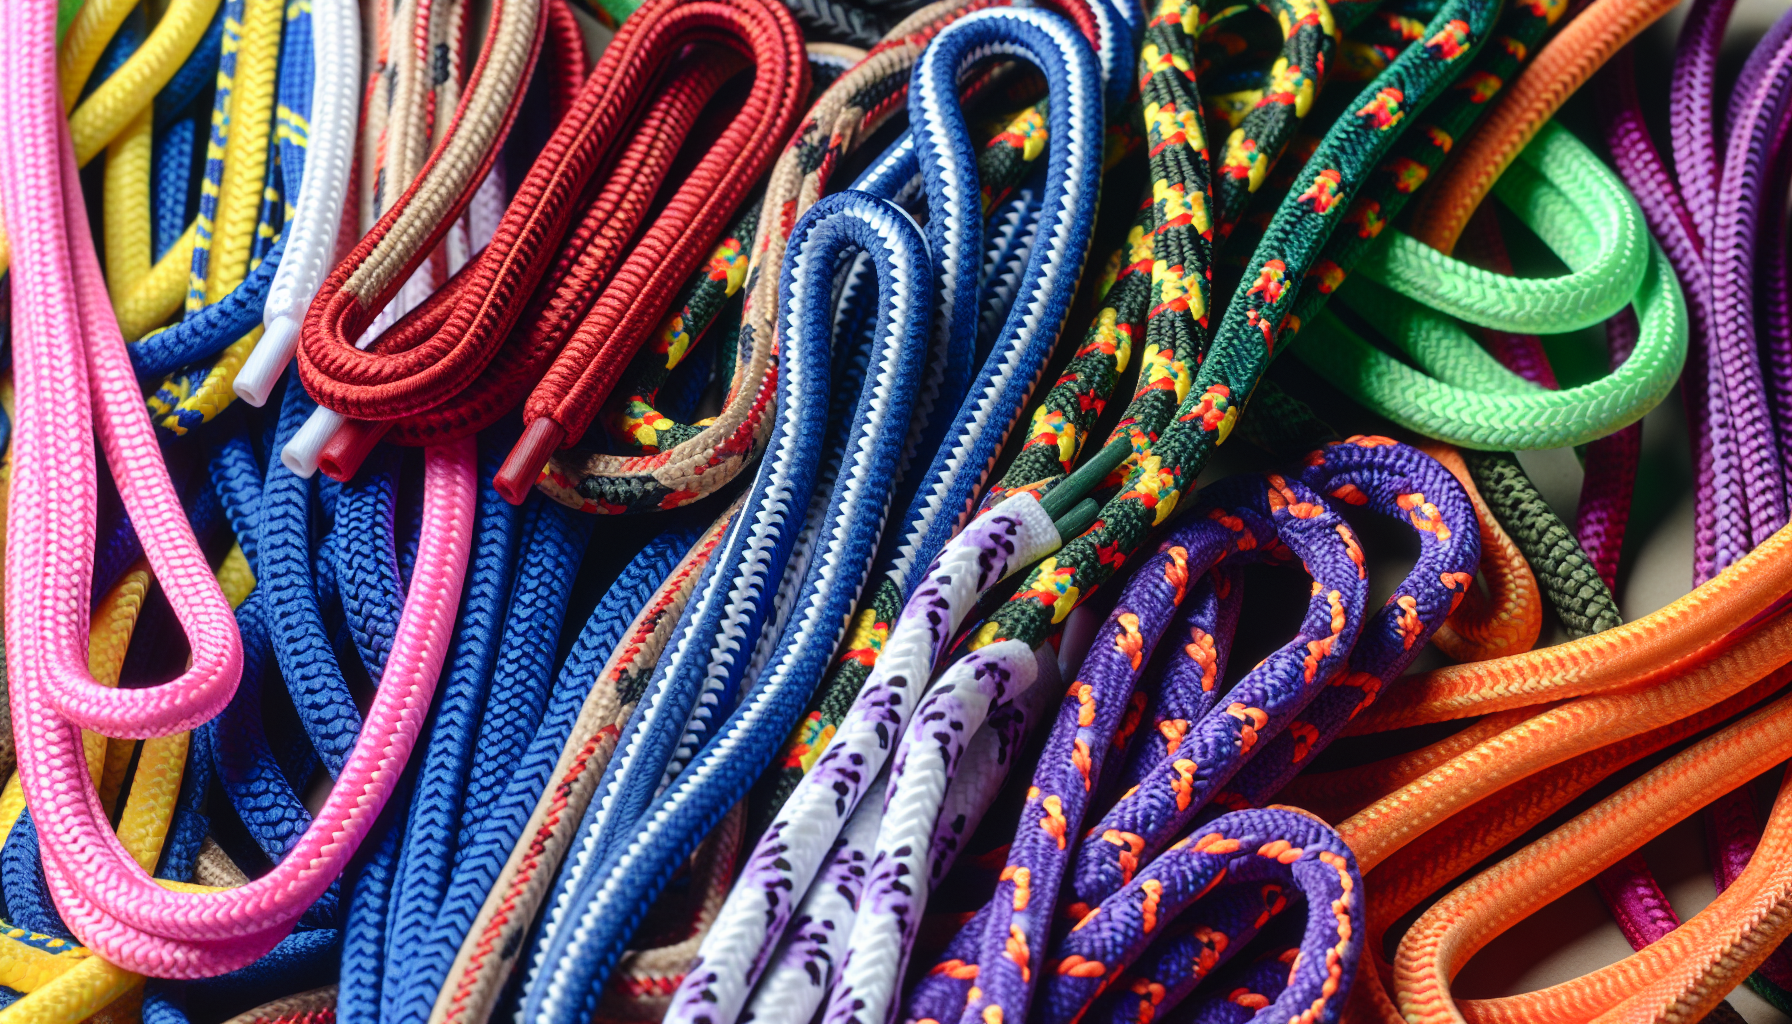 Variety of colorful rope laces for sneakers